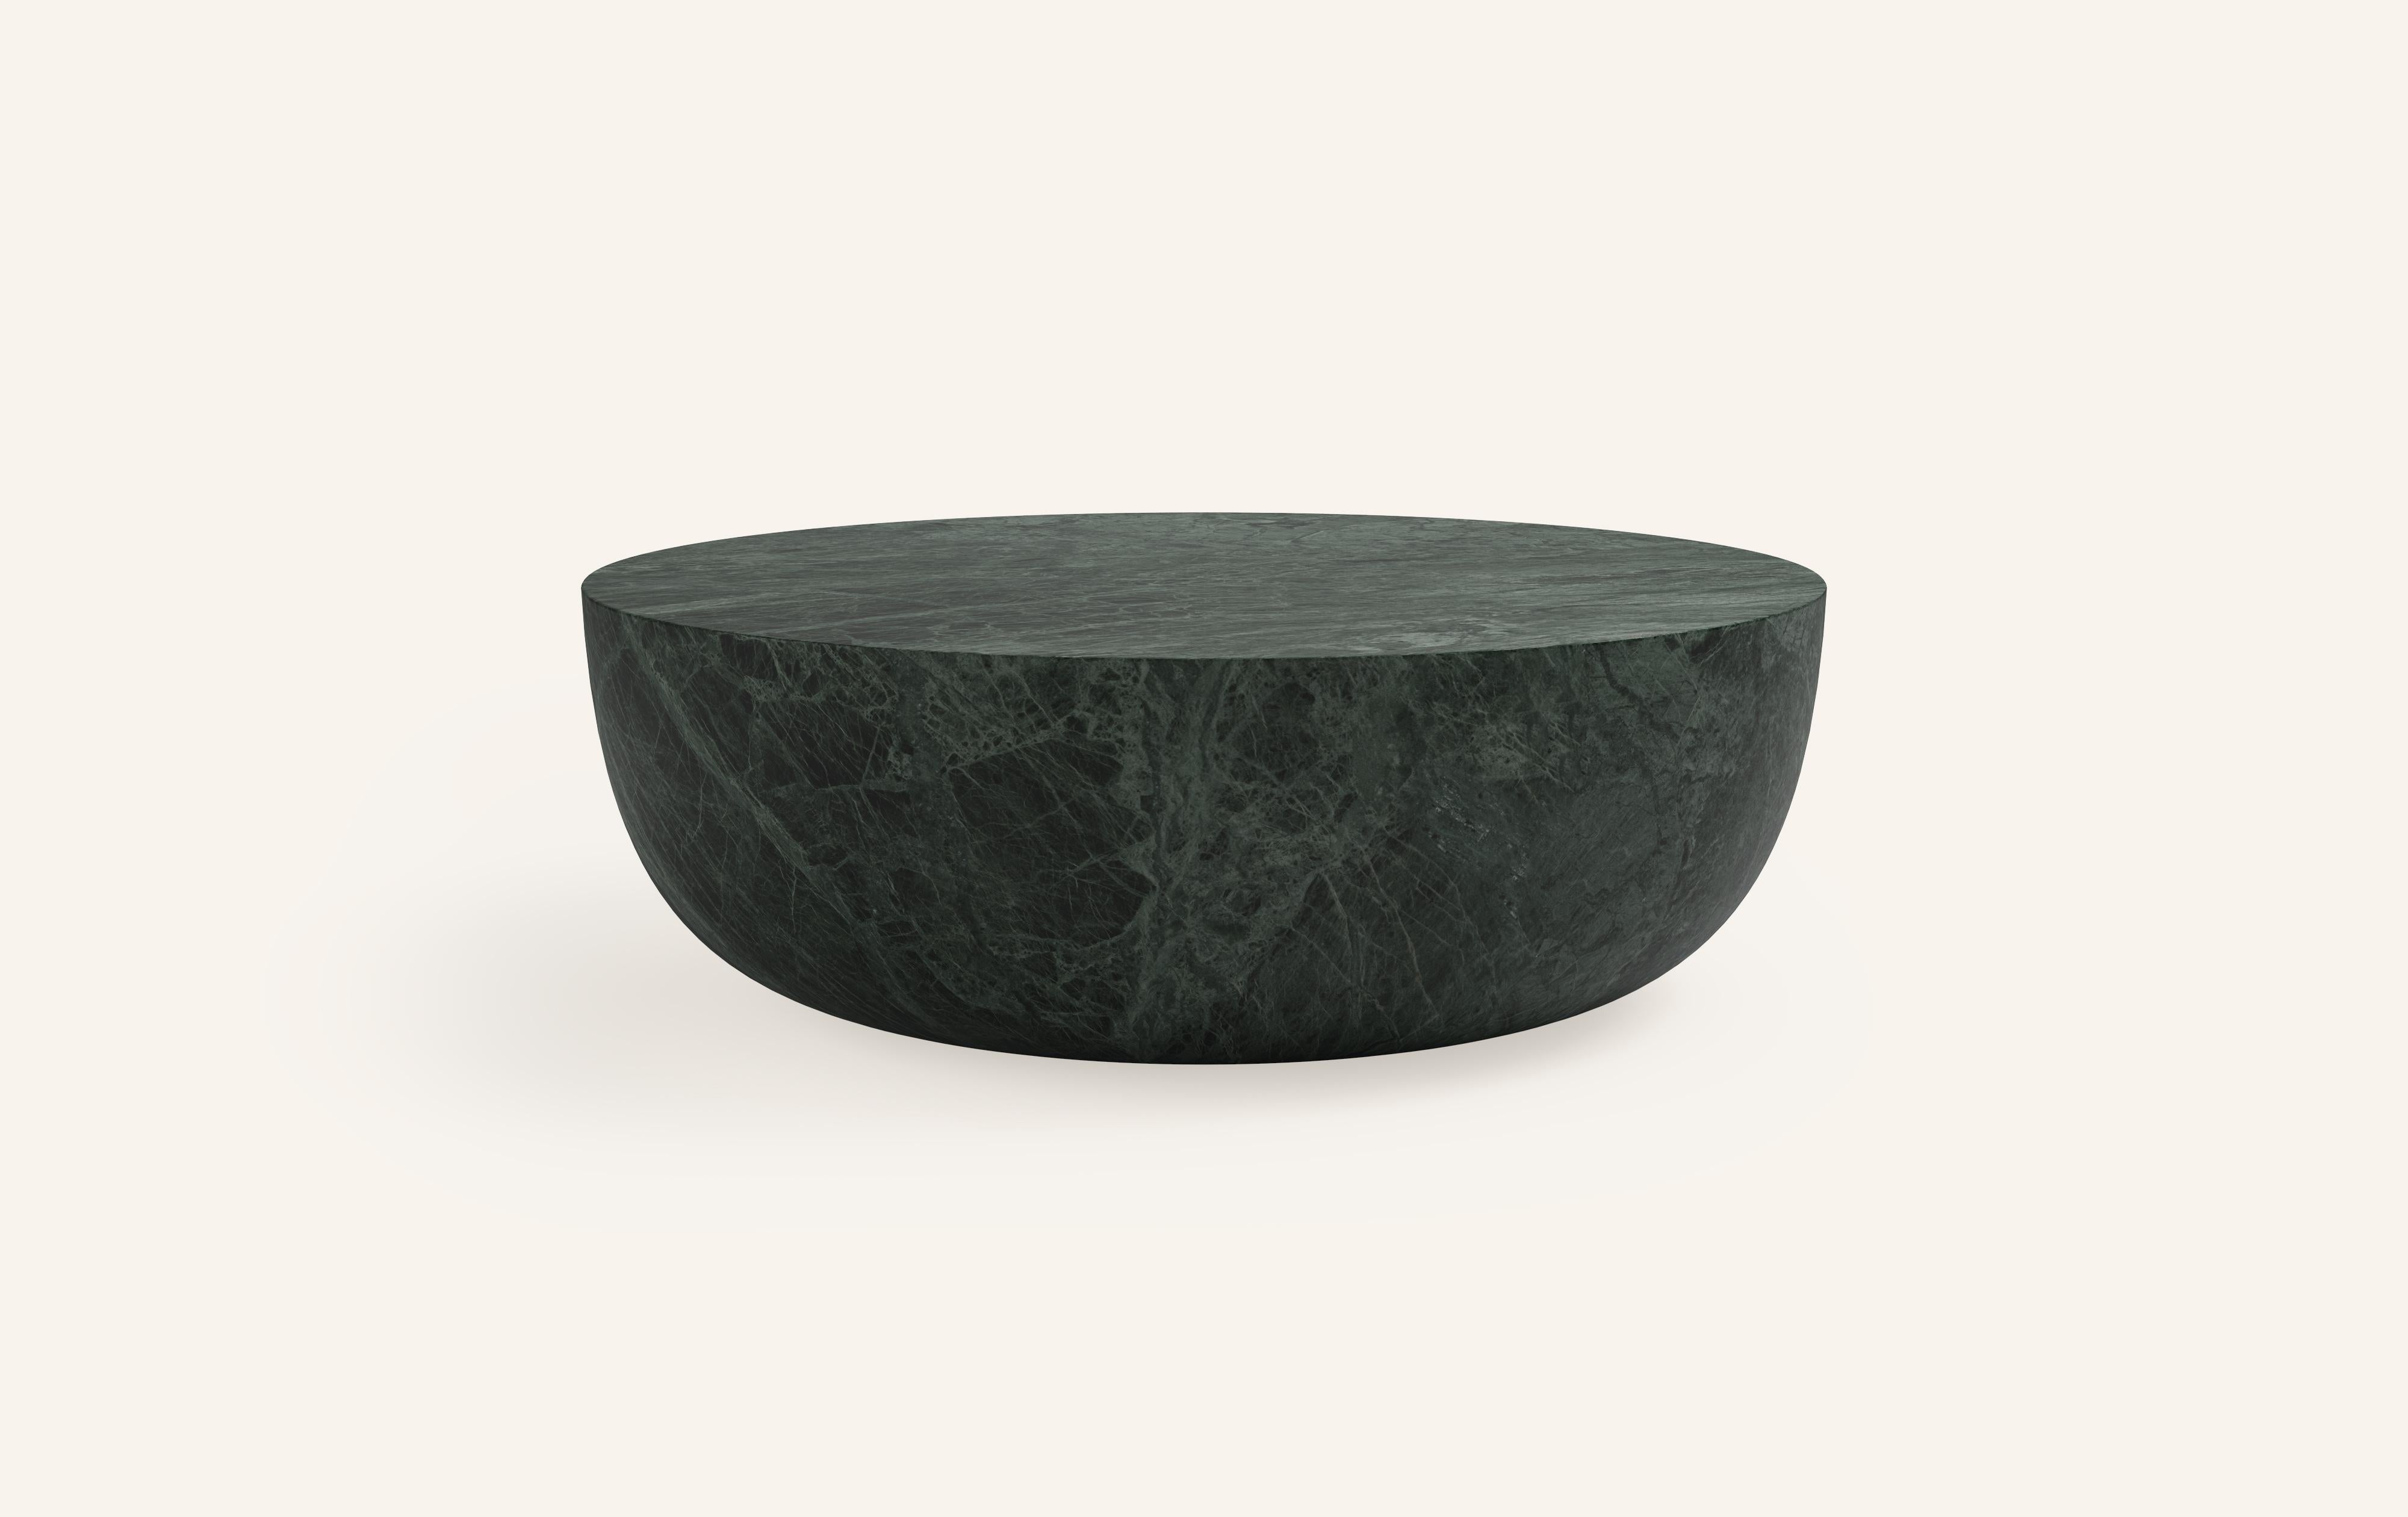 A SLICE OF A ’SPHERE’ OR 'SFERA' IN ITALIAN BALANCES A FLAT SURFACE ATOP AND ROBUST MONOLITH FORM. WITH A BASE SOFTENED BY A CURVED PROFILE, SFERA IS SOFT AND EARTHY IN ITS AVAILABLE STONE SELECTIONS.

DIMENSIONS: 
36”L x 36”W x 16”H: 
- SOLID BLOCK